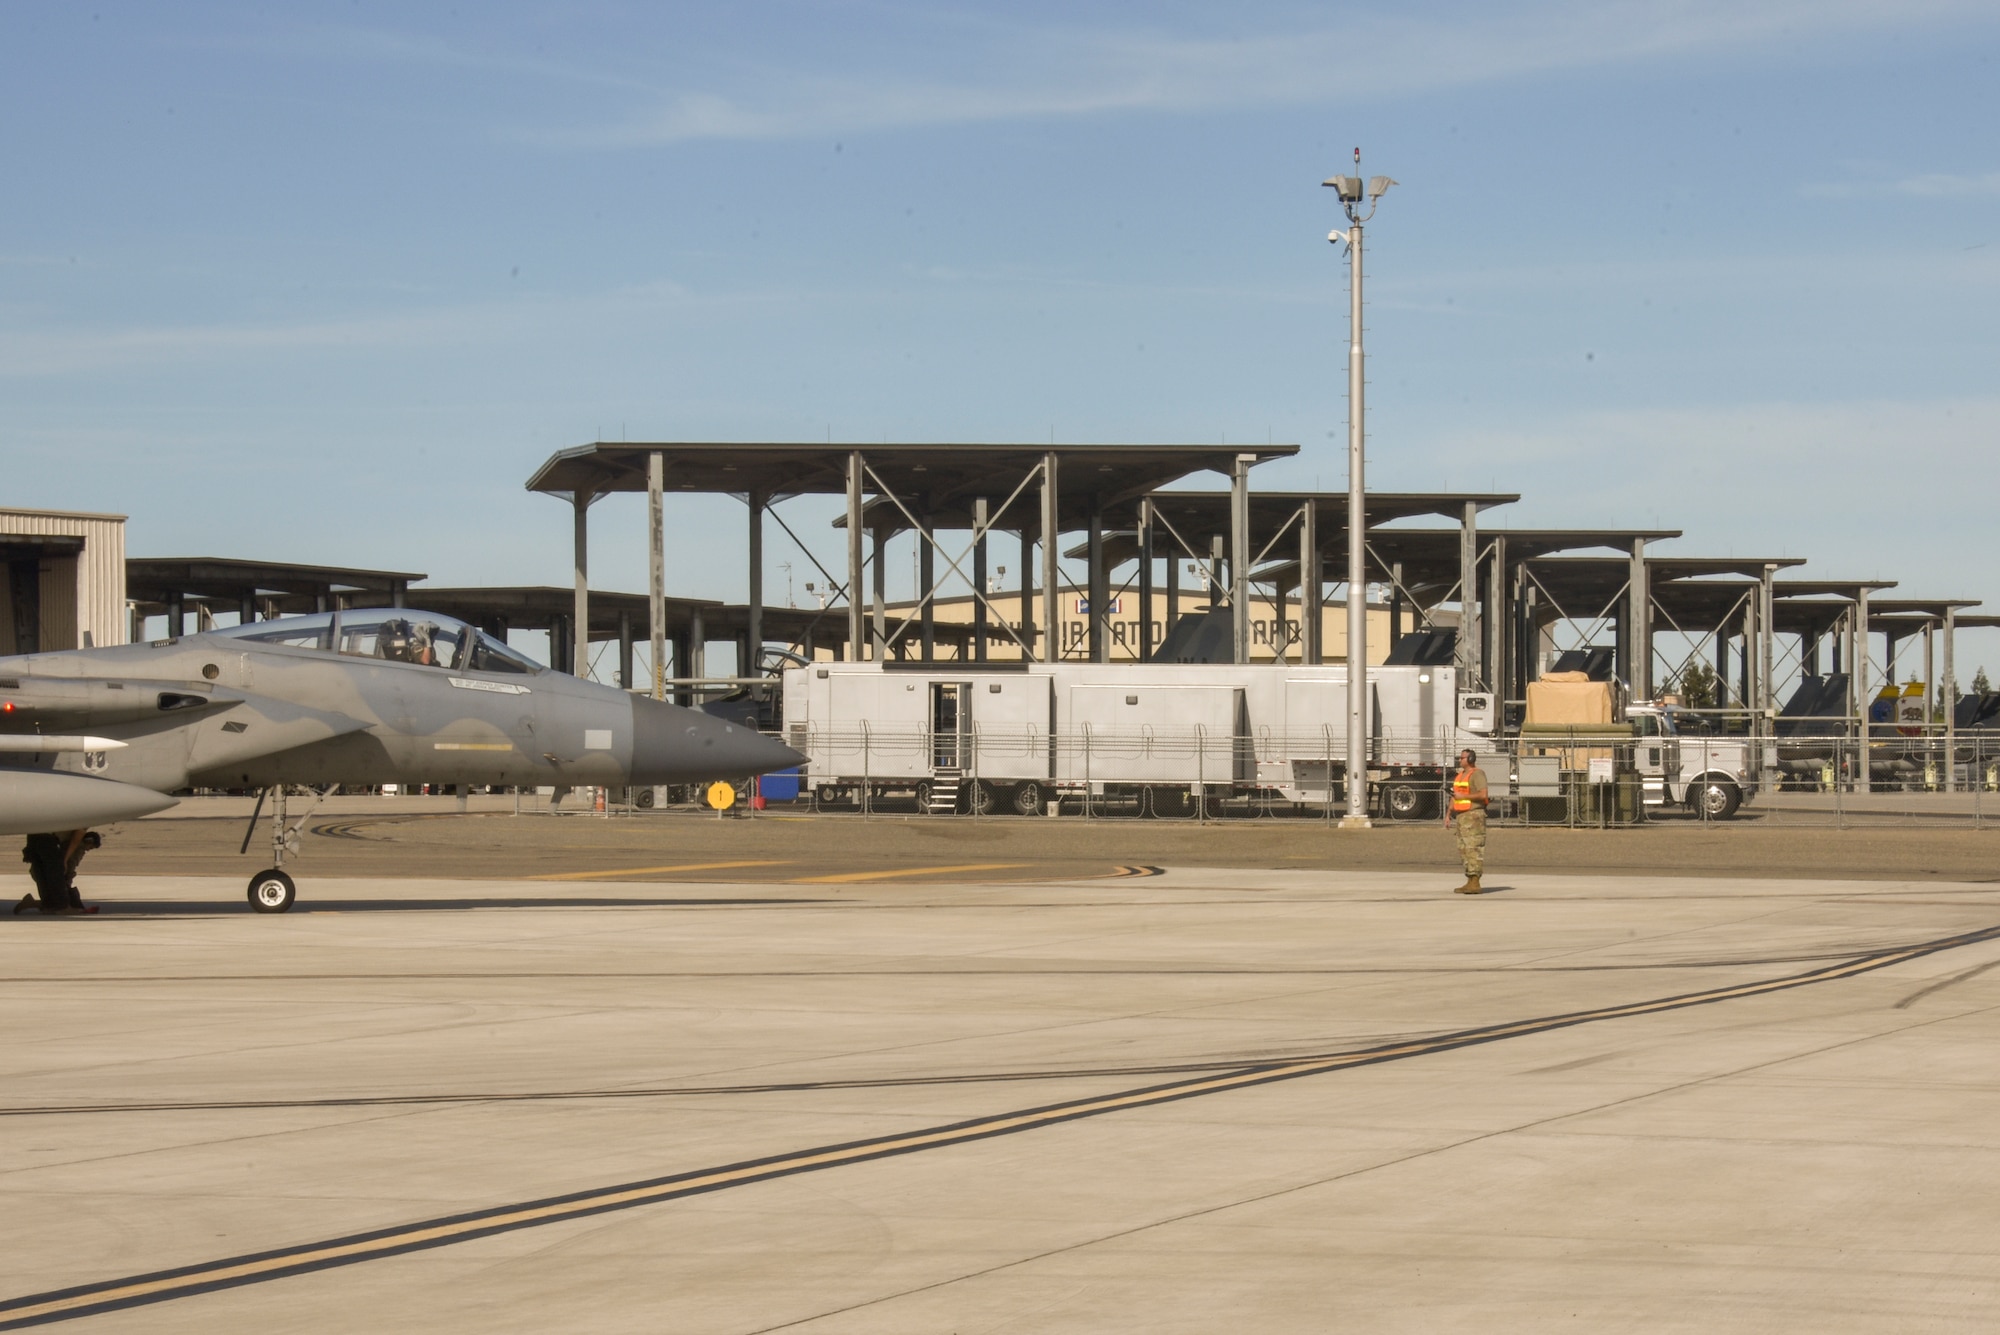 An adaptive basing trailer, which is a one-of a kind prototype that was developed by Airmen from the 144th Fighter Wing, is parked on the flightline at the Fresno Air National Guard while conducting operational proof-of-concept tests to launch and recovery F-15C Eagles, June 9, 2022.